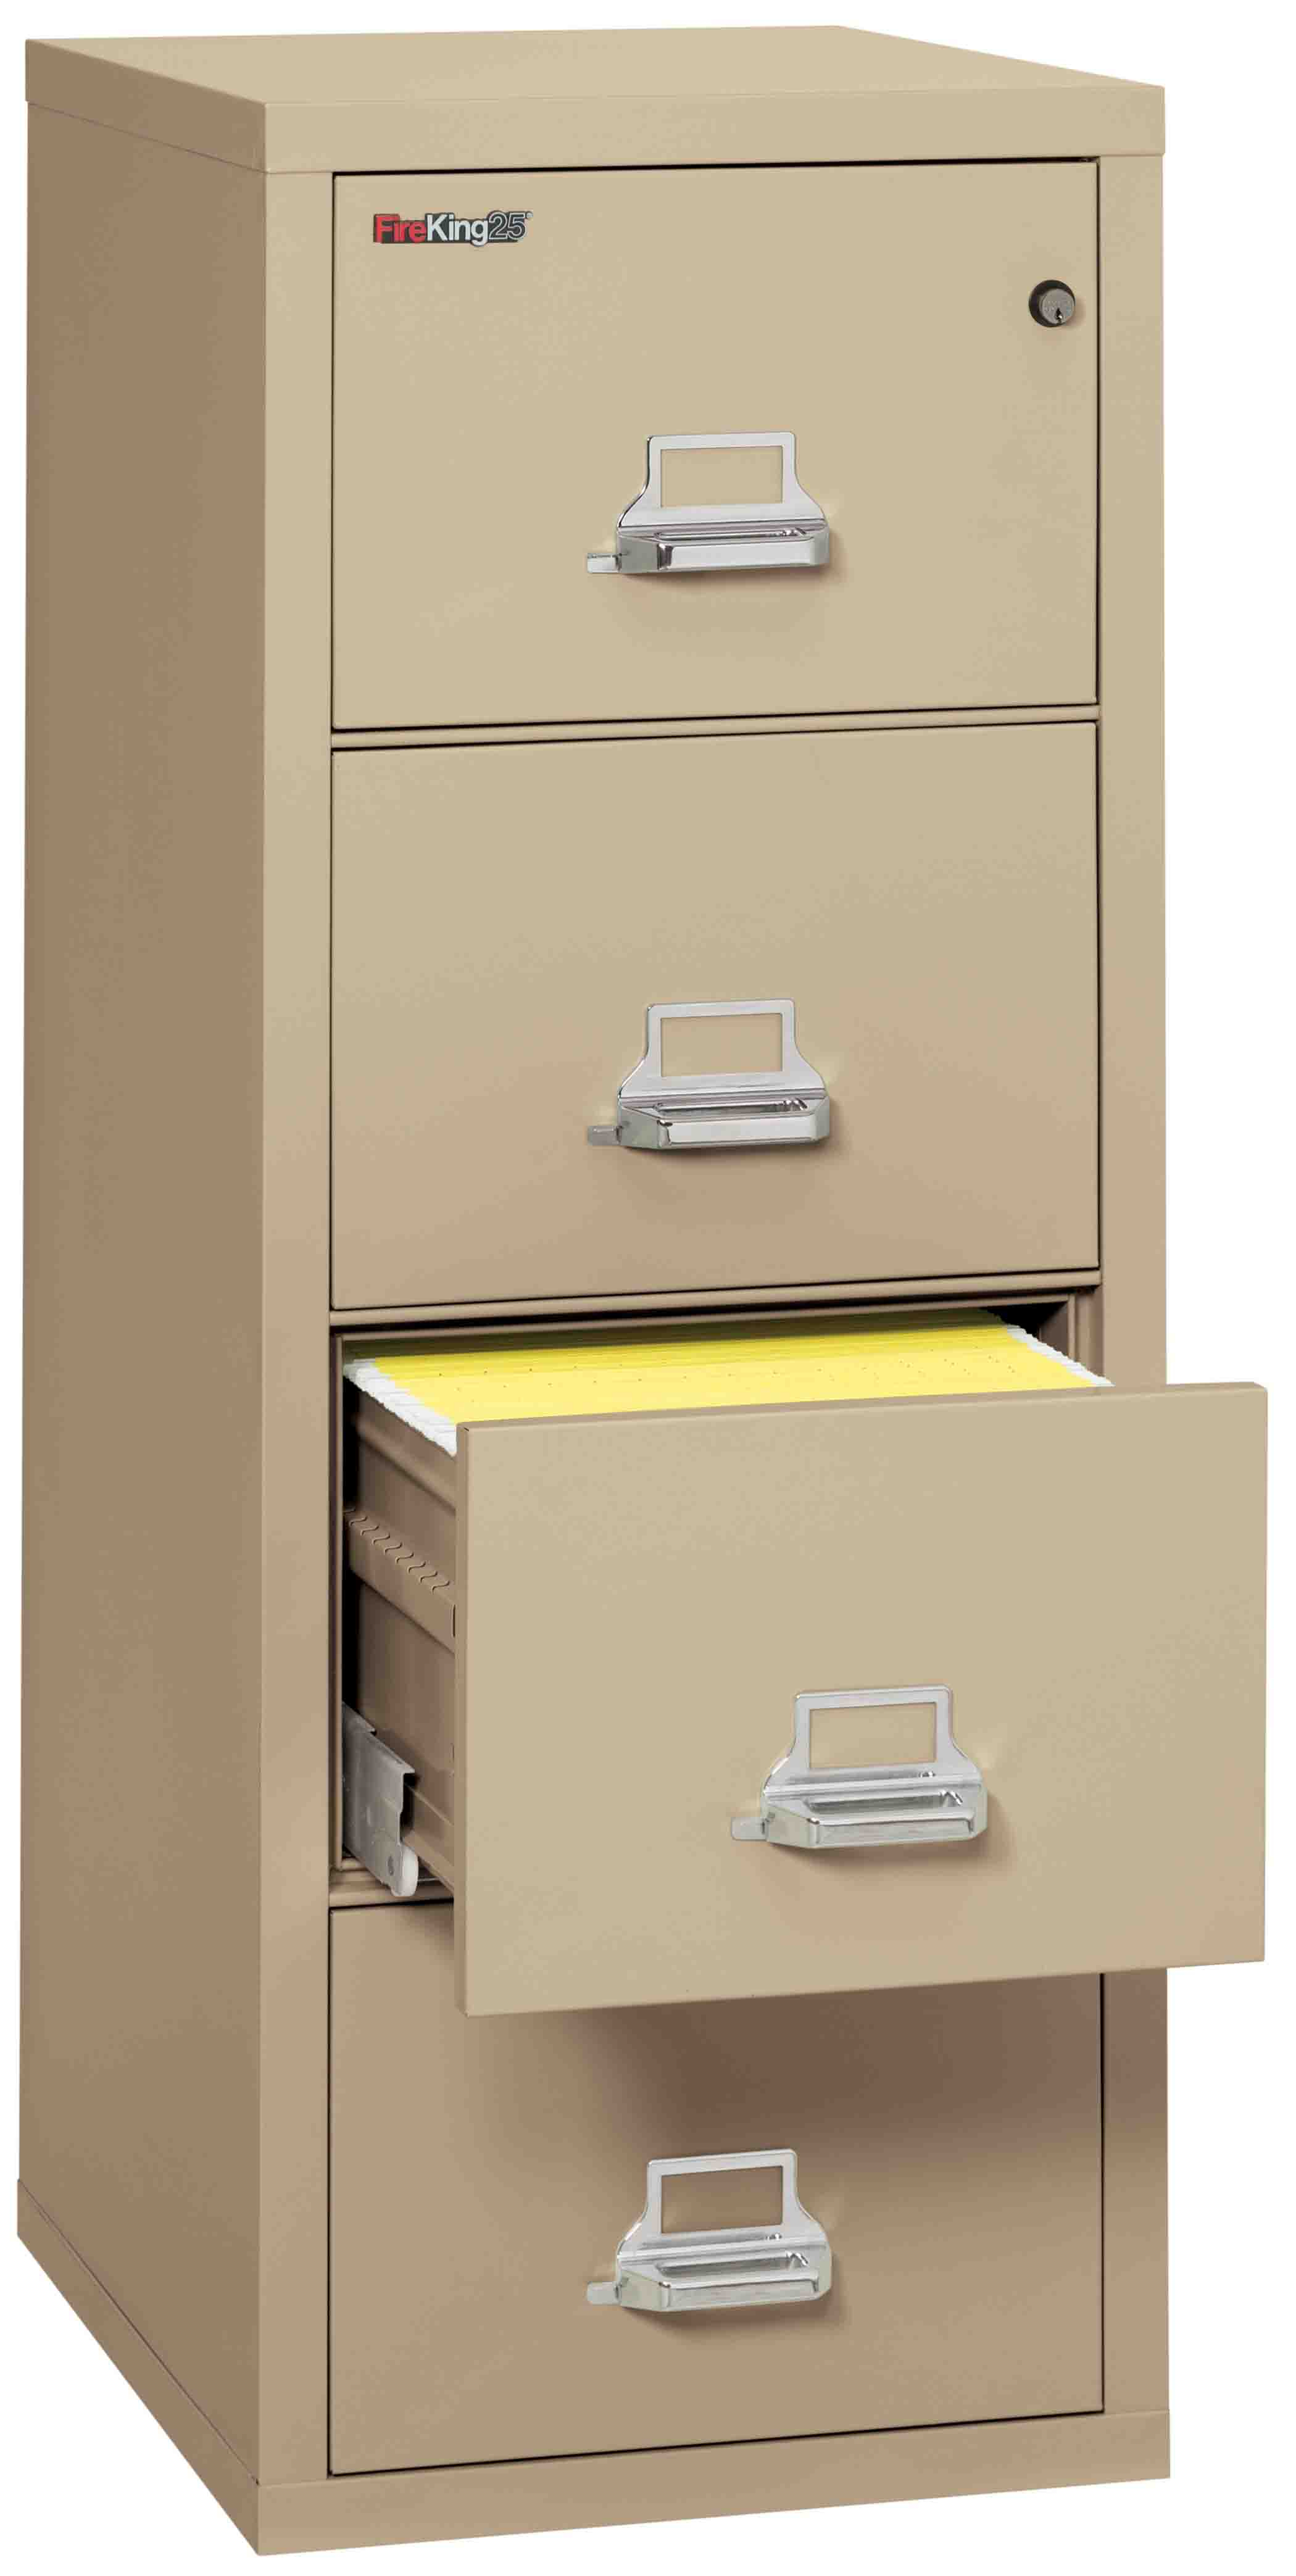 Fire King 4 1825 C Fireking 25 File Cabinets 4 Drawer 1 Hour Fire with regard to dimensions 2100 X 4174